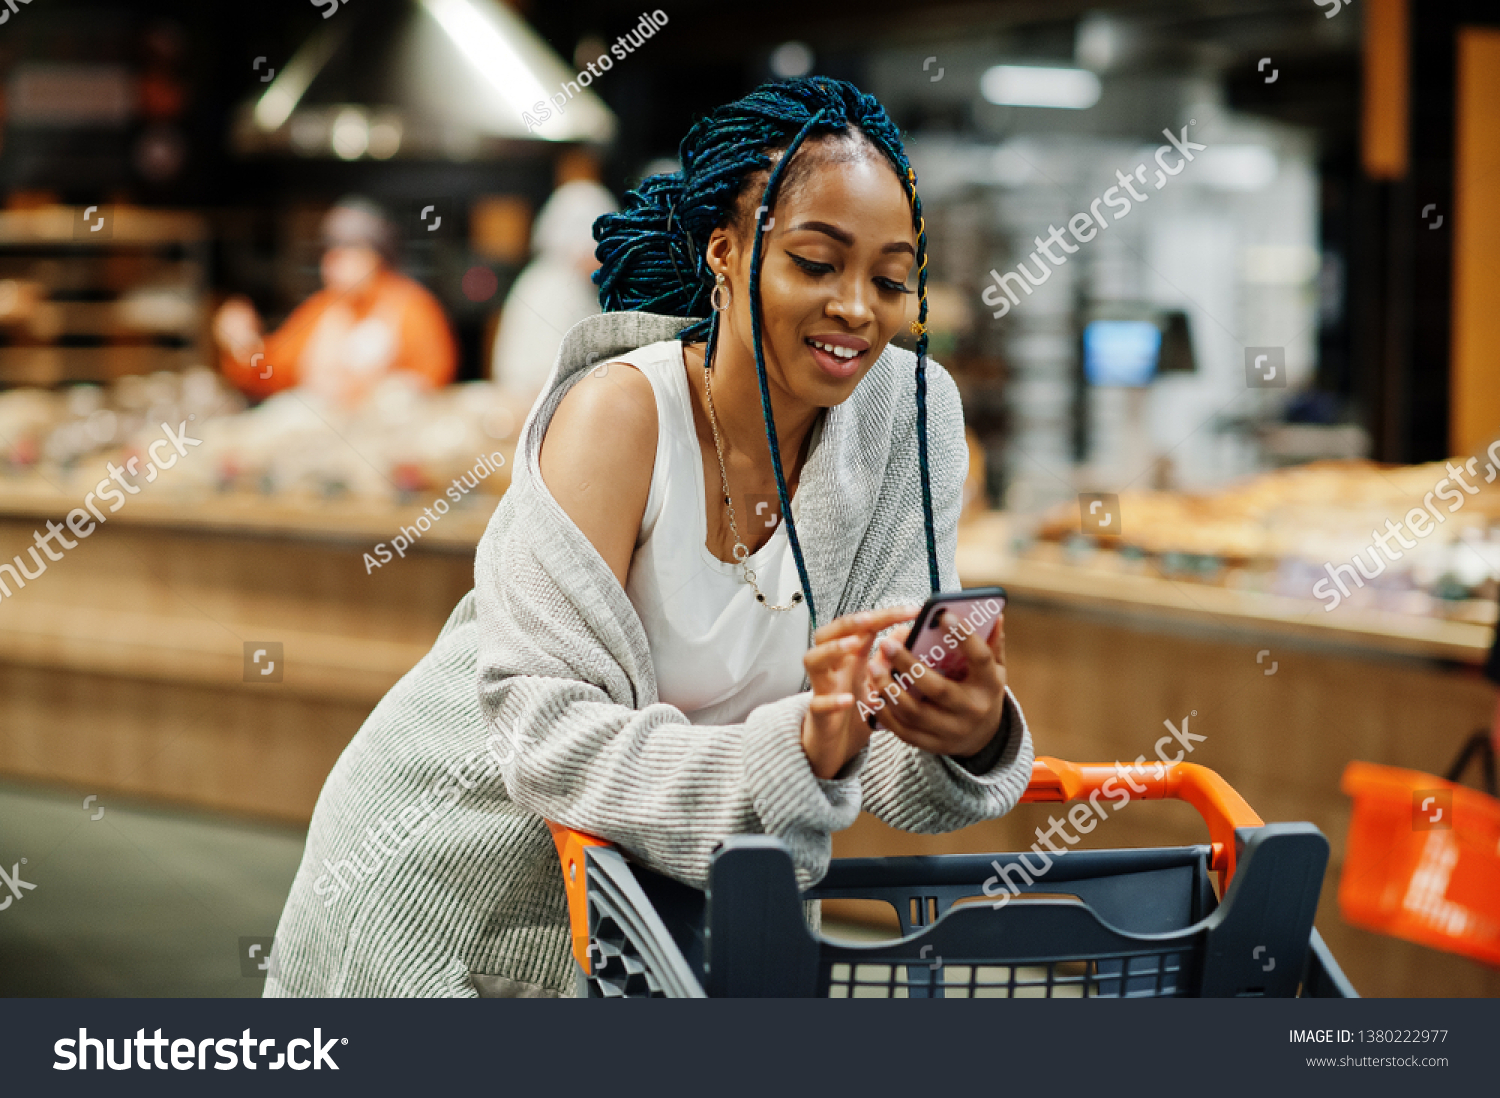 African American Woman Shopping Cart Trolley Stock Photo 1380222977 ...